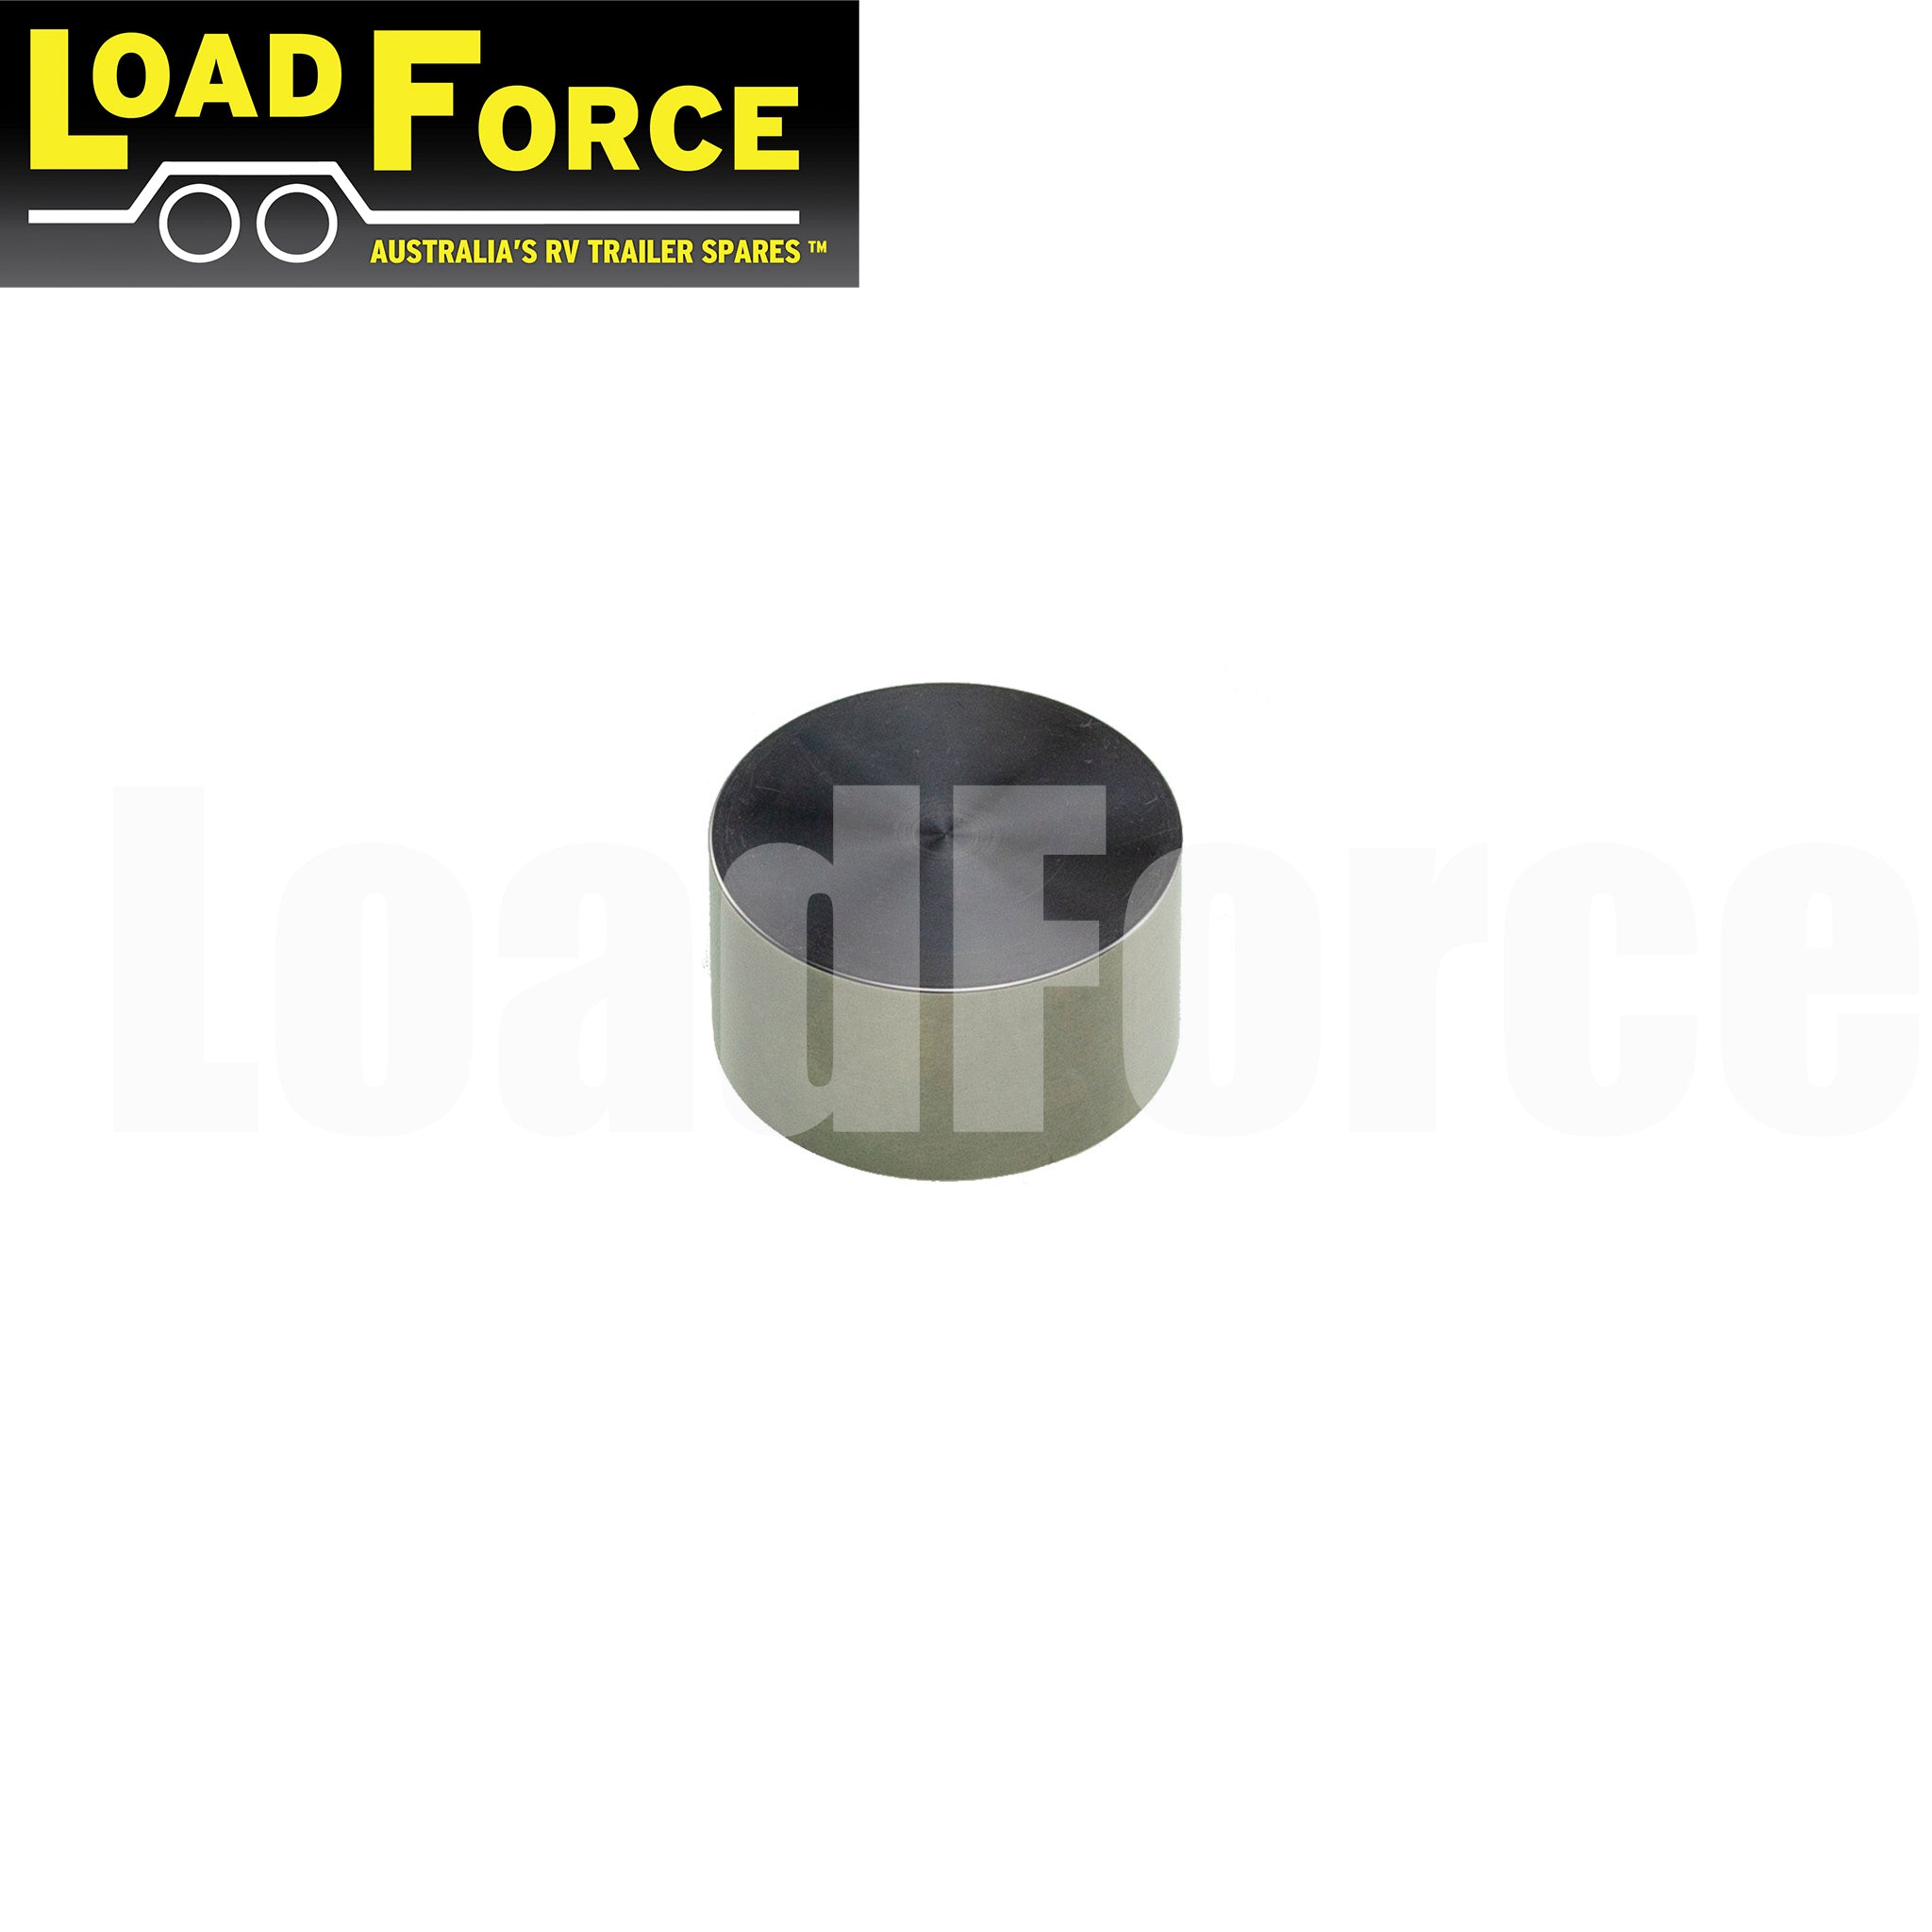 Stainless steel piston for LoadForce TA200 and Trigg A200